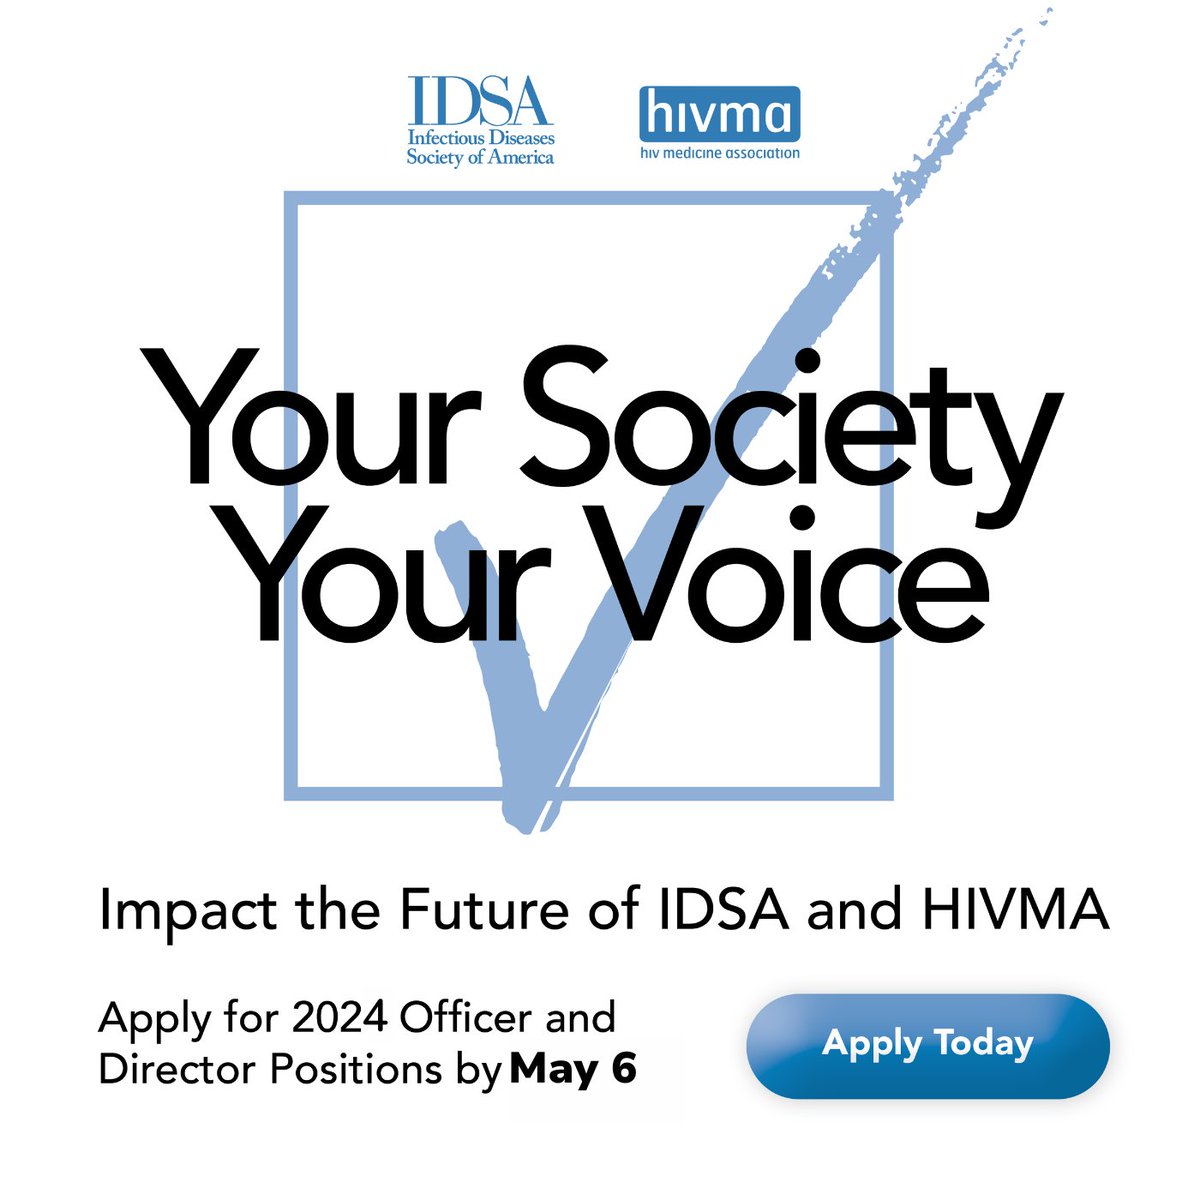 Help shape the #FutureofID. Apply for one of the open positions on the IDSA or @HIVMA Board of Directors. Apply to IDSA’s open positions: bit.ly/2GOL0kn Apply to HIVMA’s open positions: hivma.org/about-us/Board…